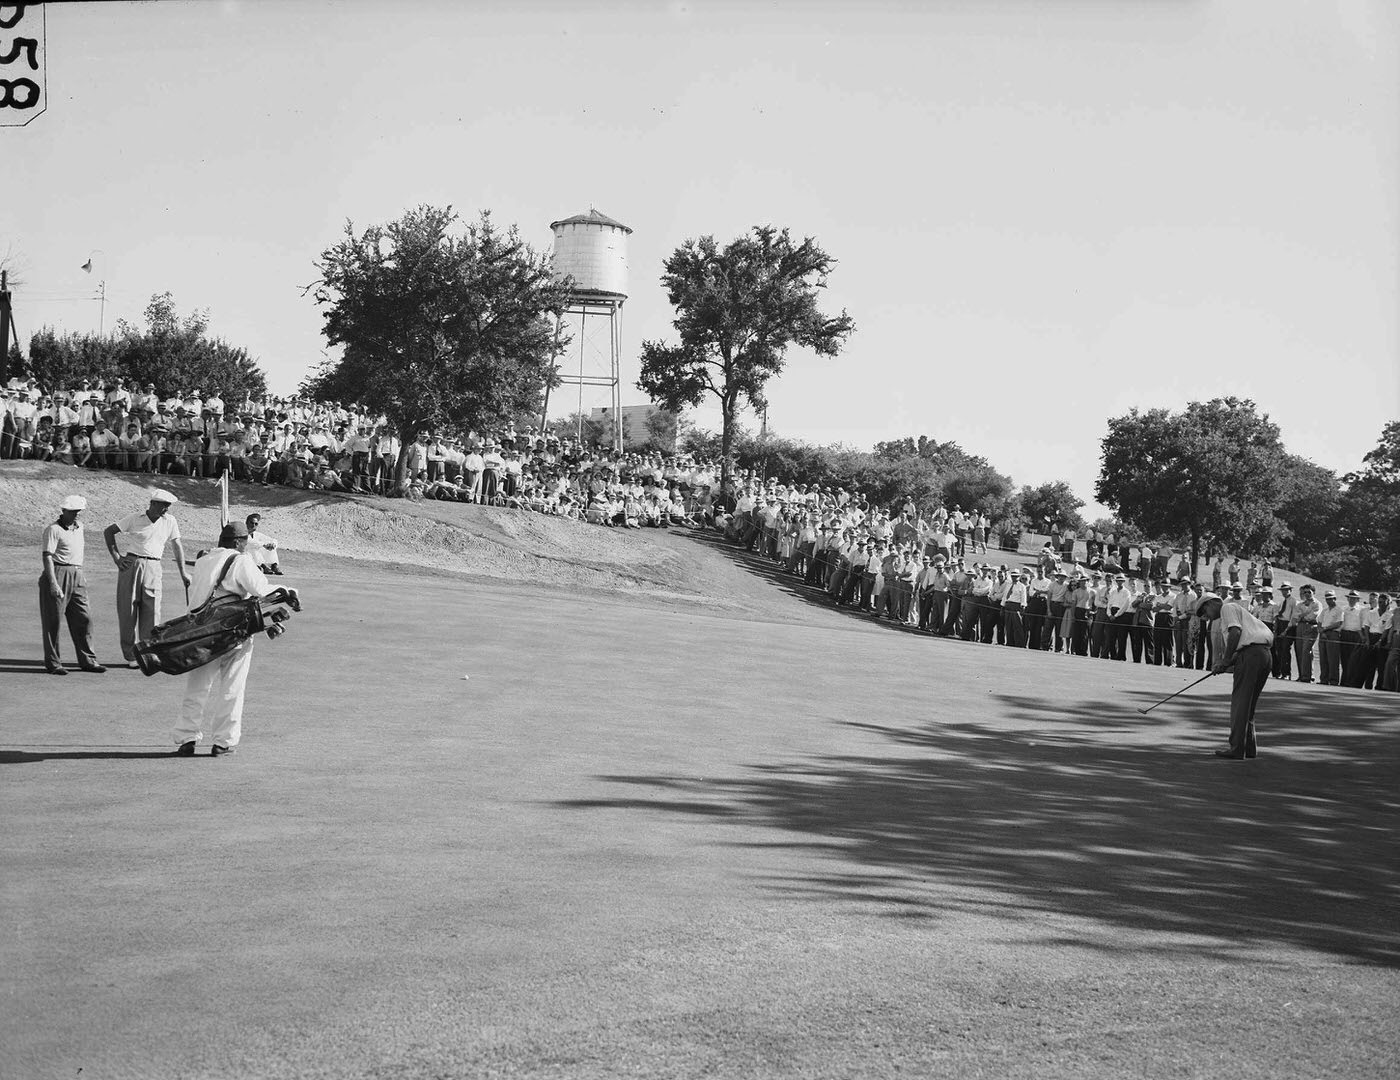 Harry Todd's long putt for birdie stopped short on No. 18 green Saturday as the huge gallery held its breath, 1946